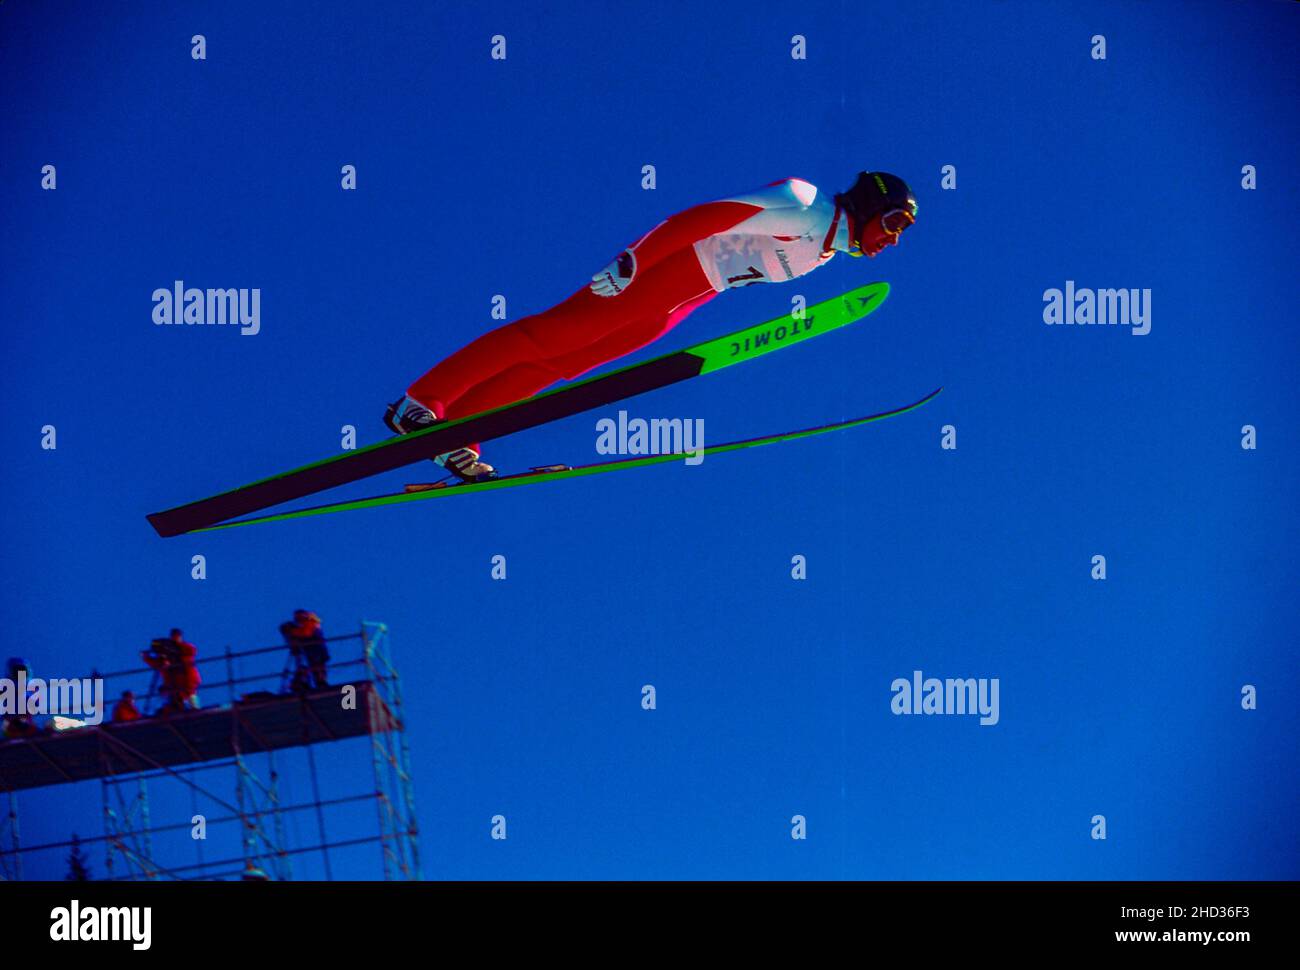 Ladislav Dluhoš (CZE) competing in the Men's K120 individual ski jumping at the 1994 Olympic Winter Games Stock Photo